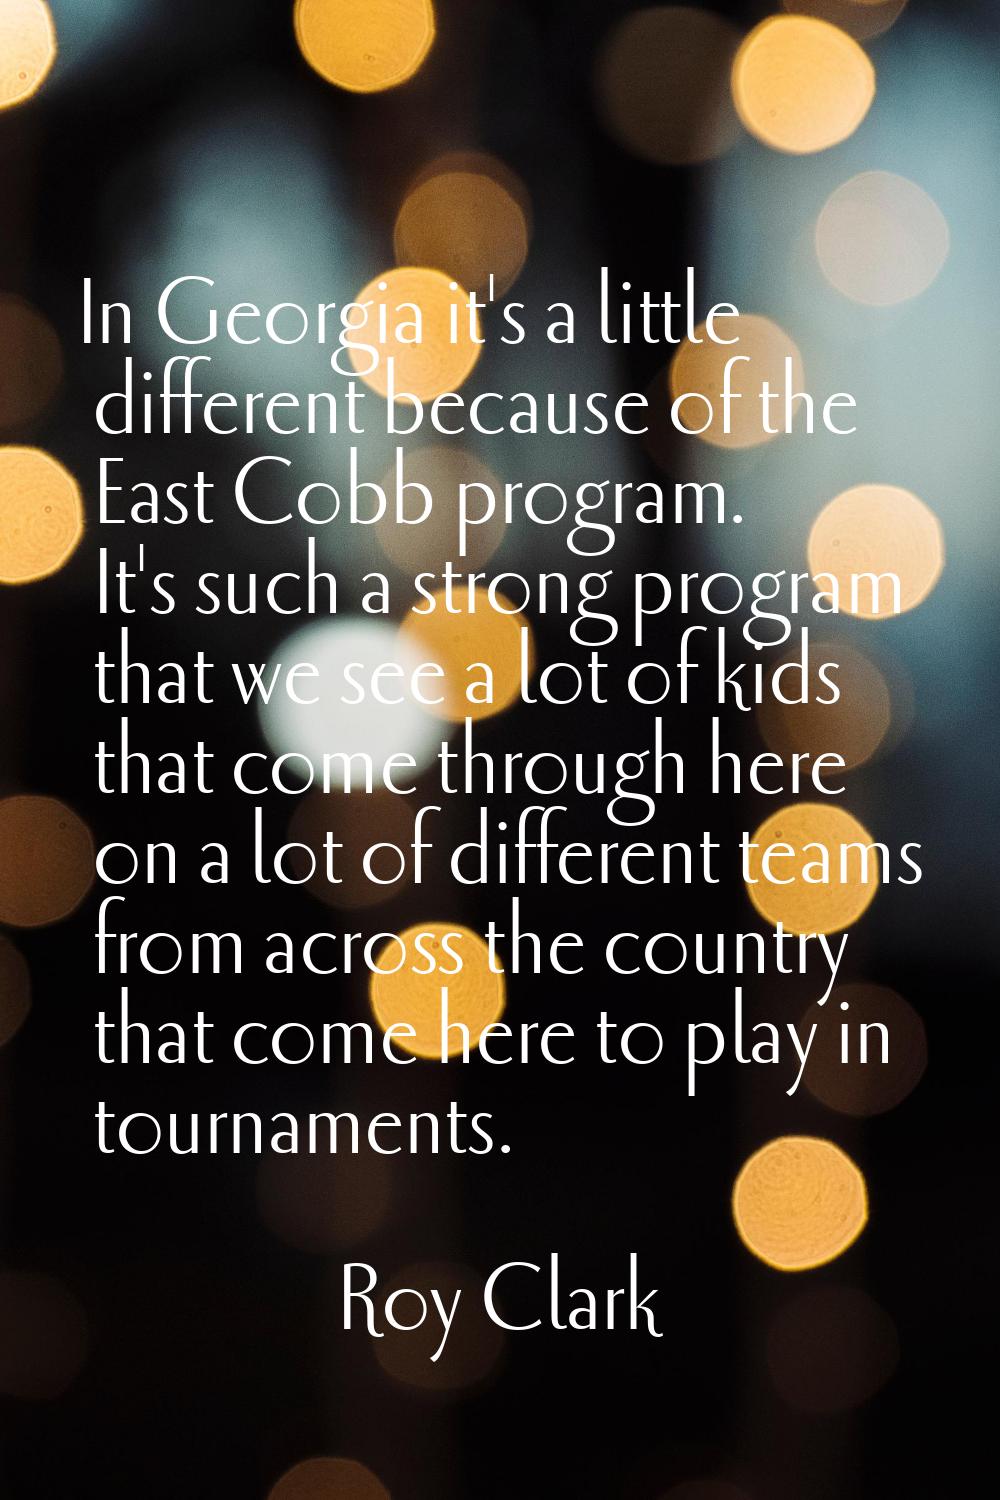 In Georgia it's a little different because of the East Cobb program. It's such a strong program tha